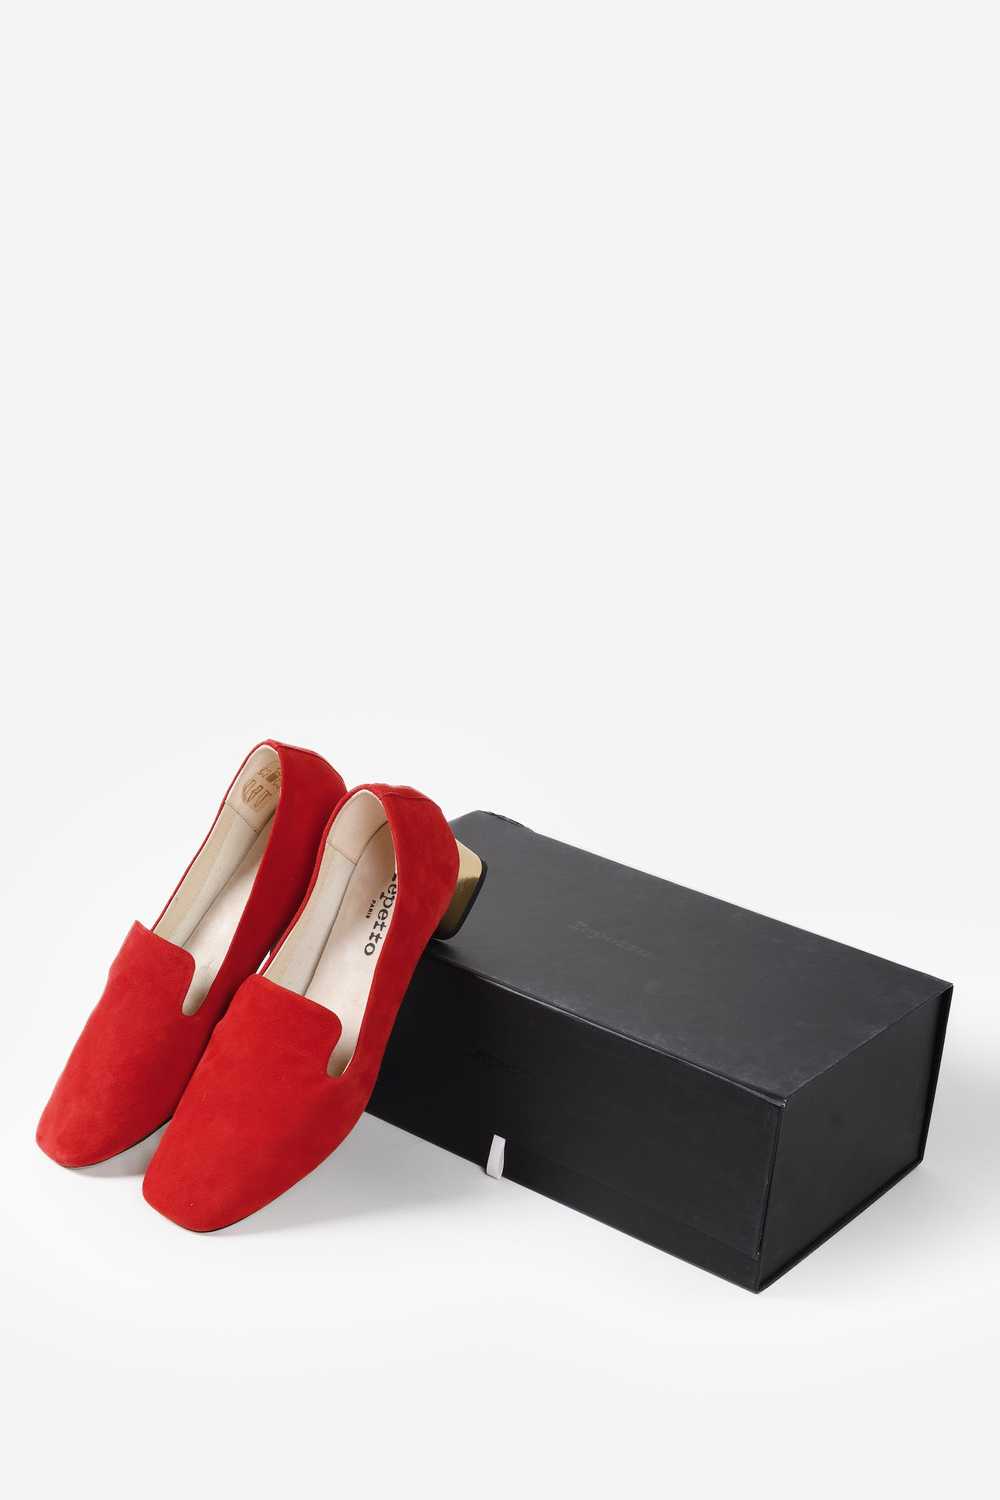 Repetto Repetto Red Suede Mathis Loafers - image 8